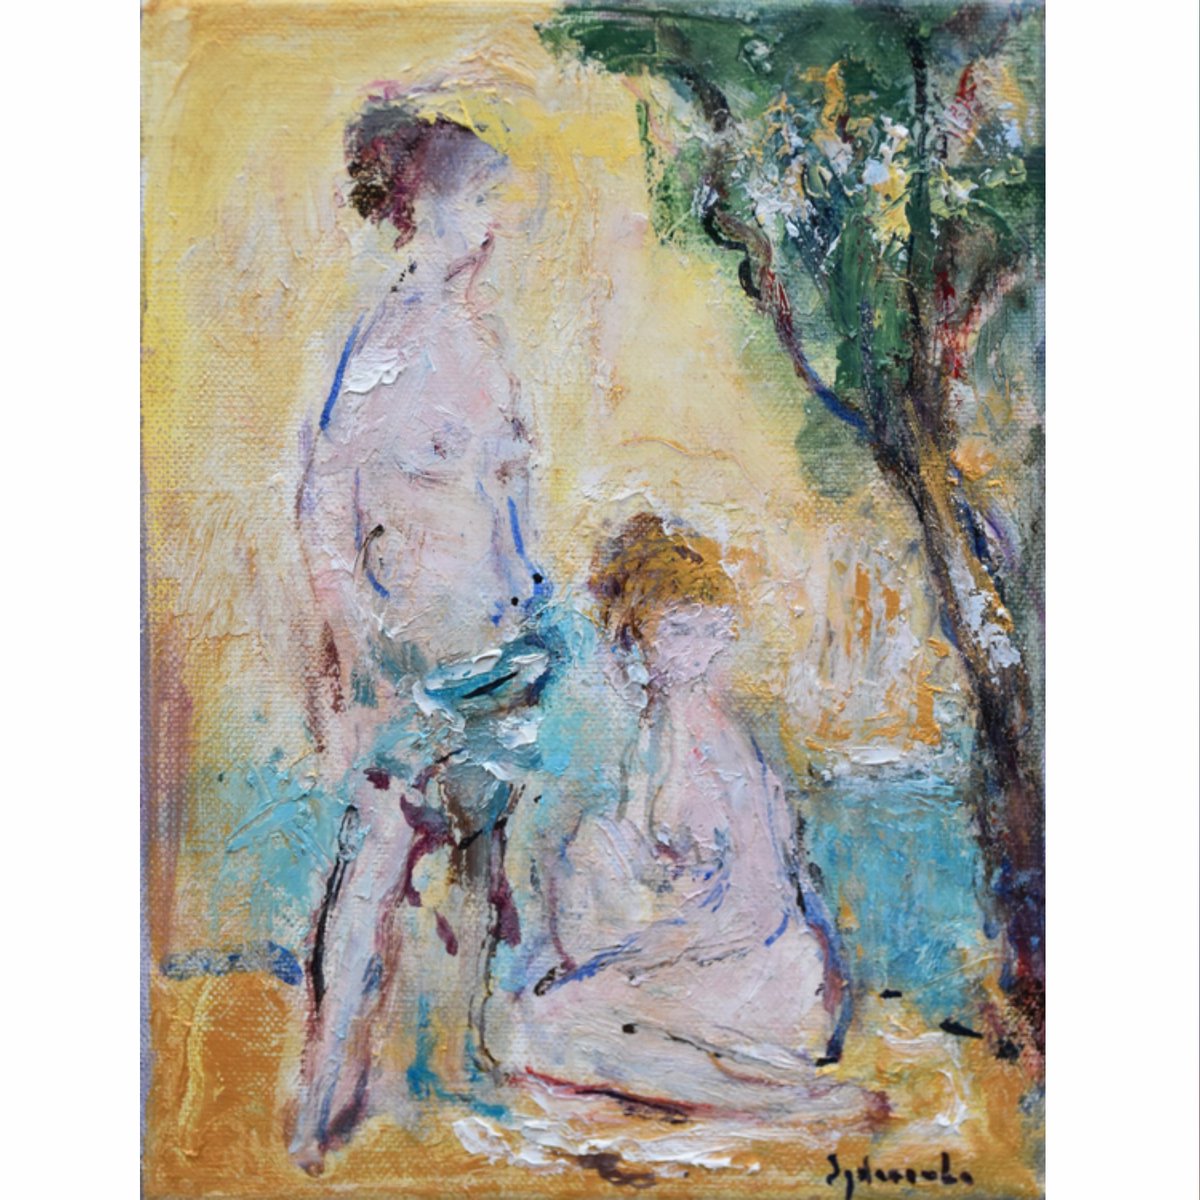 At the river
#oilpainting on 22x16cm #canvas by #mishasydorenko #contemporaryartist #figurativeart  #onlineartgallery #onlinegallery #artcollectors #fineart #art   #contemporaryart #artgallery #artdealers #exhibition #contemporaryartist #paris